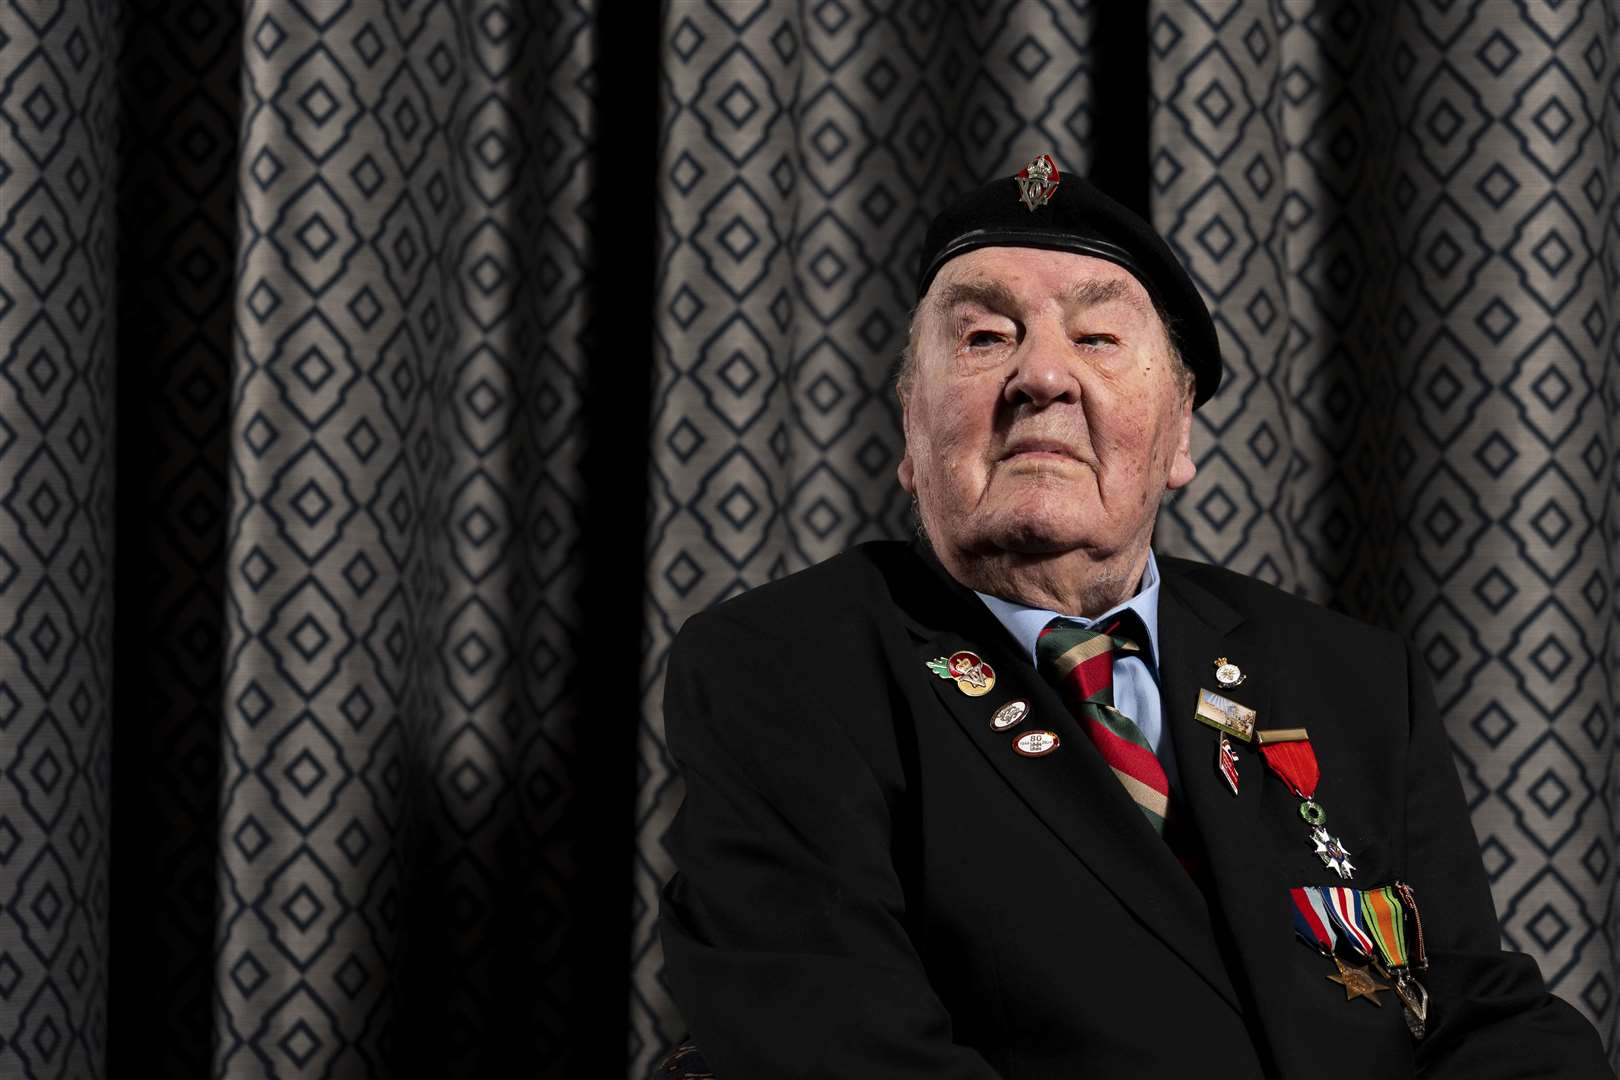 Richard Aldred was a Cromwell tank driver with the 7th Armoured Division of the Royal Tank Regiment (Jordan Pettitt/PA)